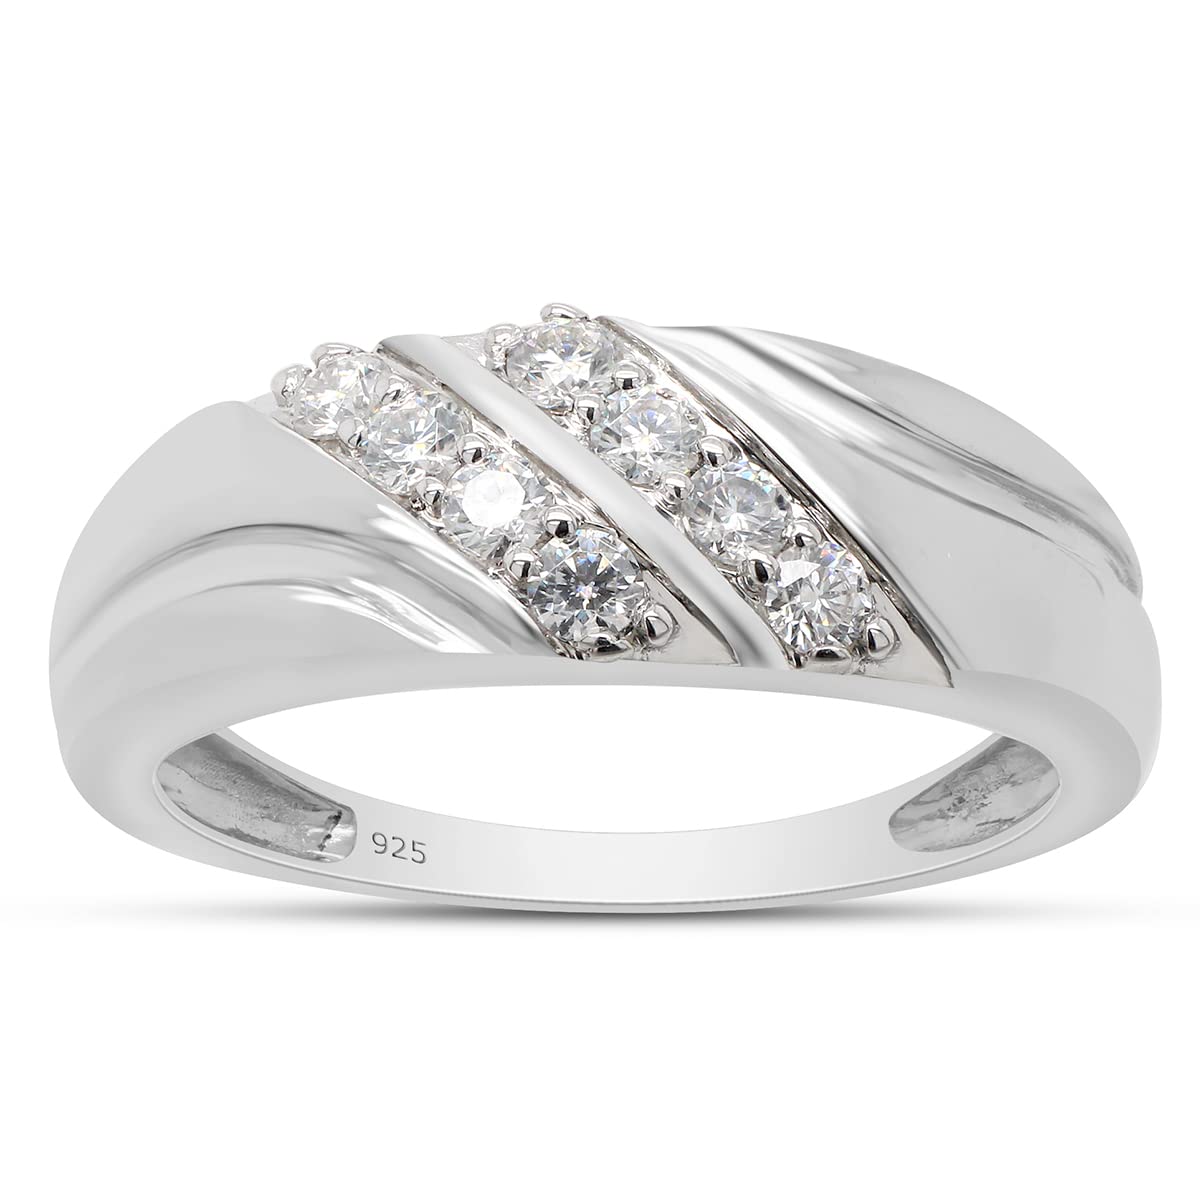 1/4 Carat Round Lab Created Moissanite Diamond Men's Women's Wedding Band Ring In 925 Sterling Silver